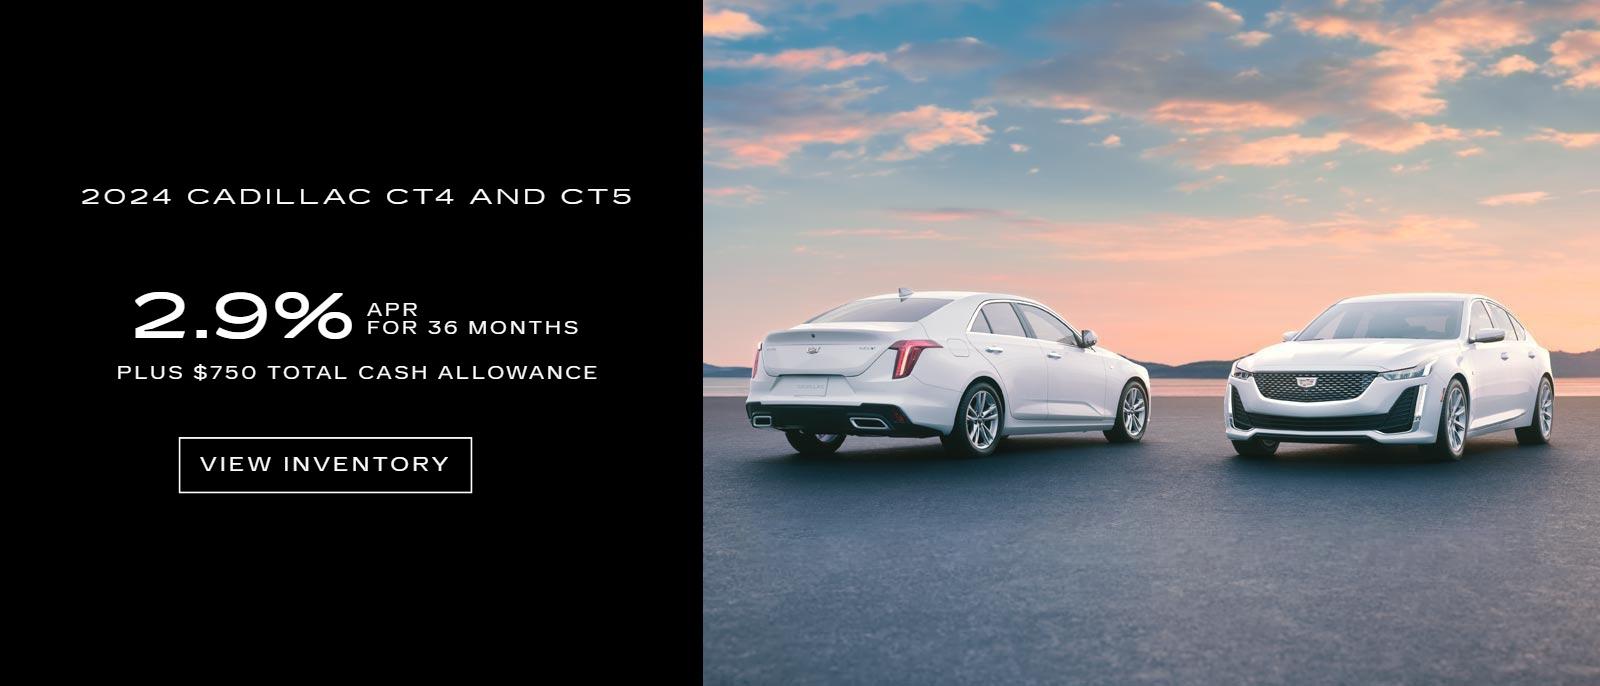 2024 CADILLAC CT4 AND CT5
2.9% for 36 months
Plus $750 Purchase Allowance